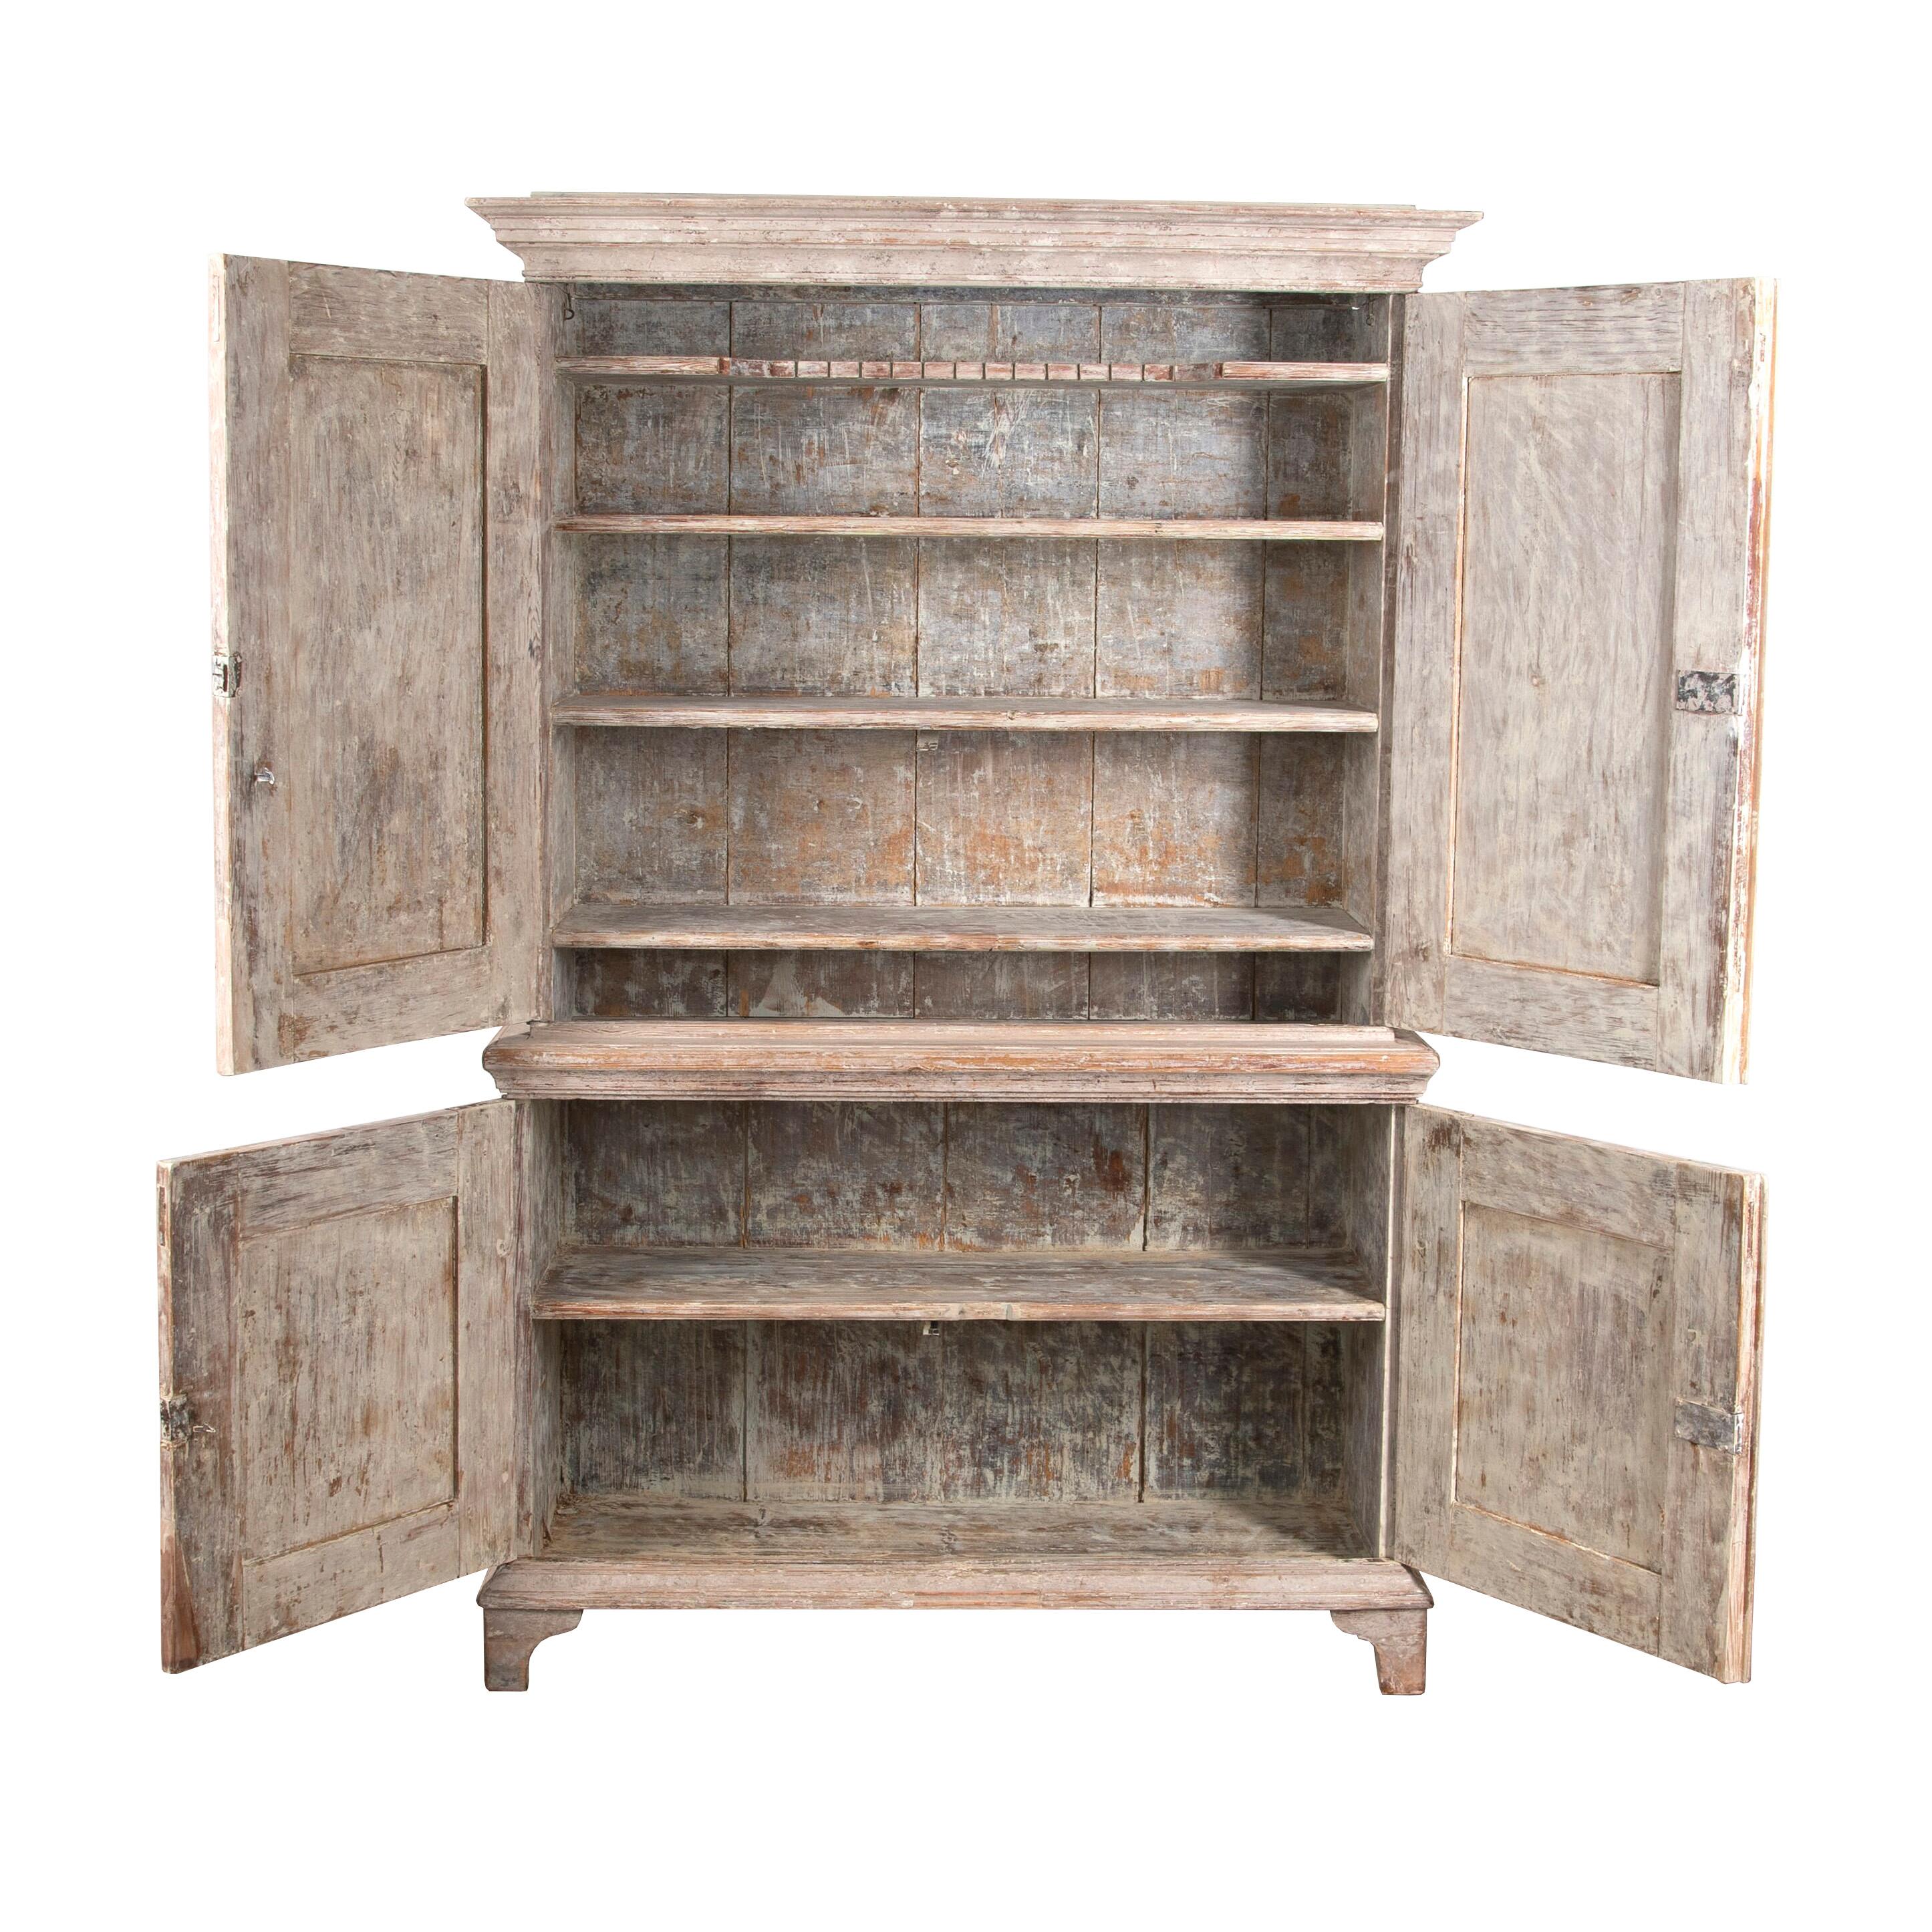 19th century Swedish two-part cabinet.
With a carved pediment and two doors with a decorative reeded design that open to useful storage.
Below are two further doors with the same design opening to further storage.
This piece has been repainted.